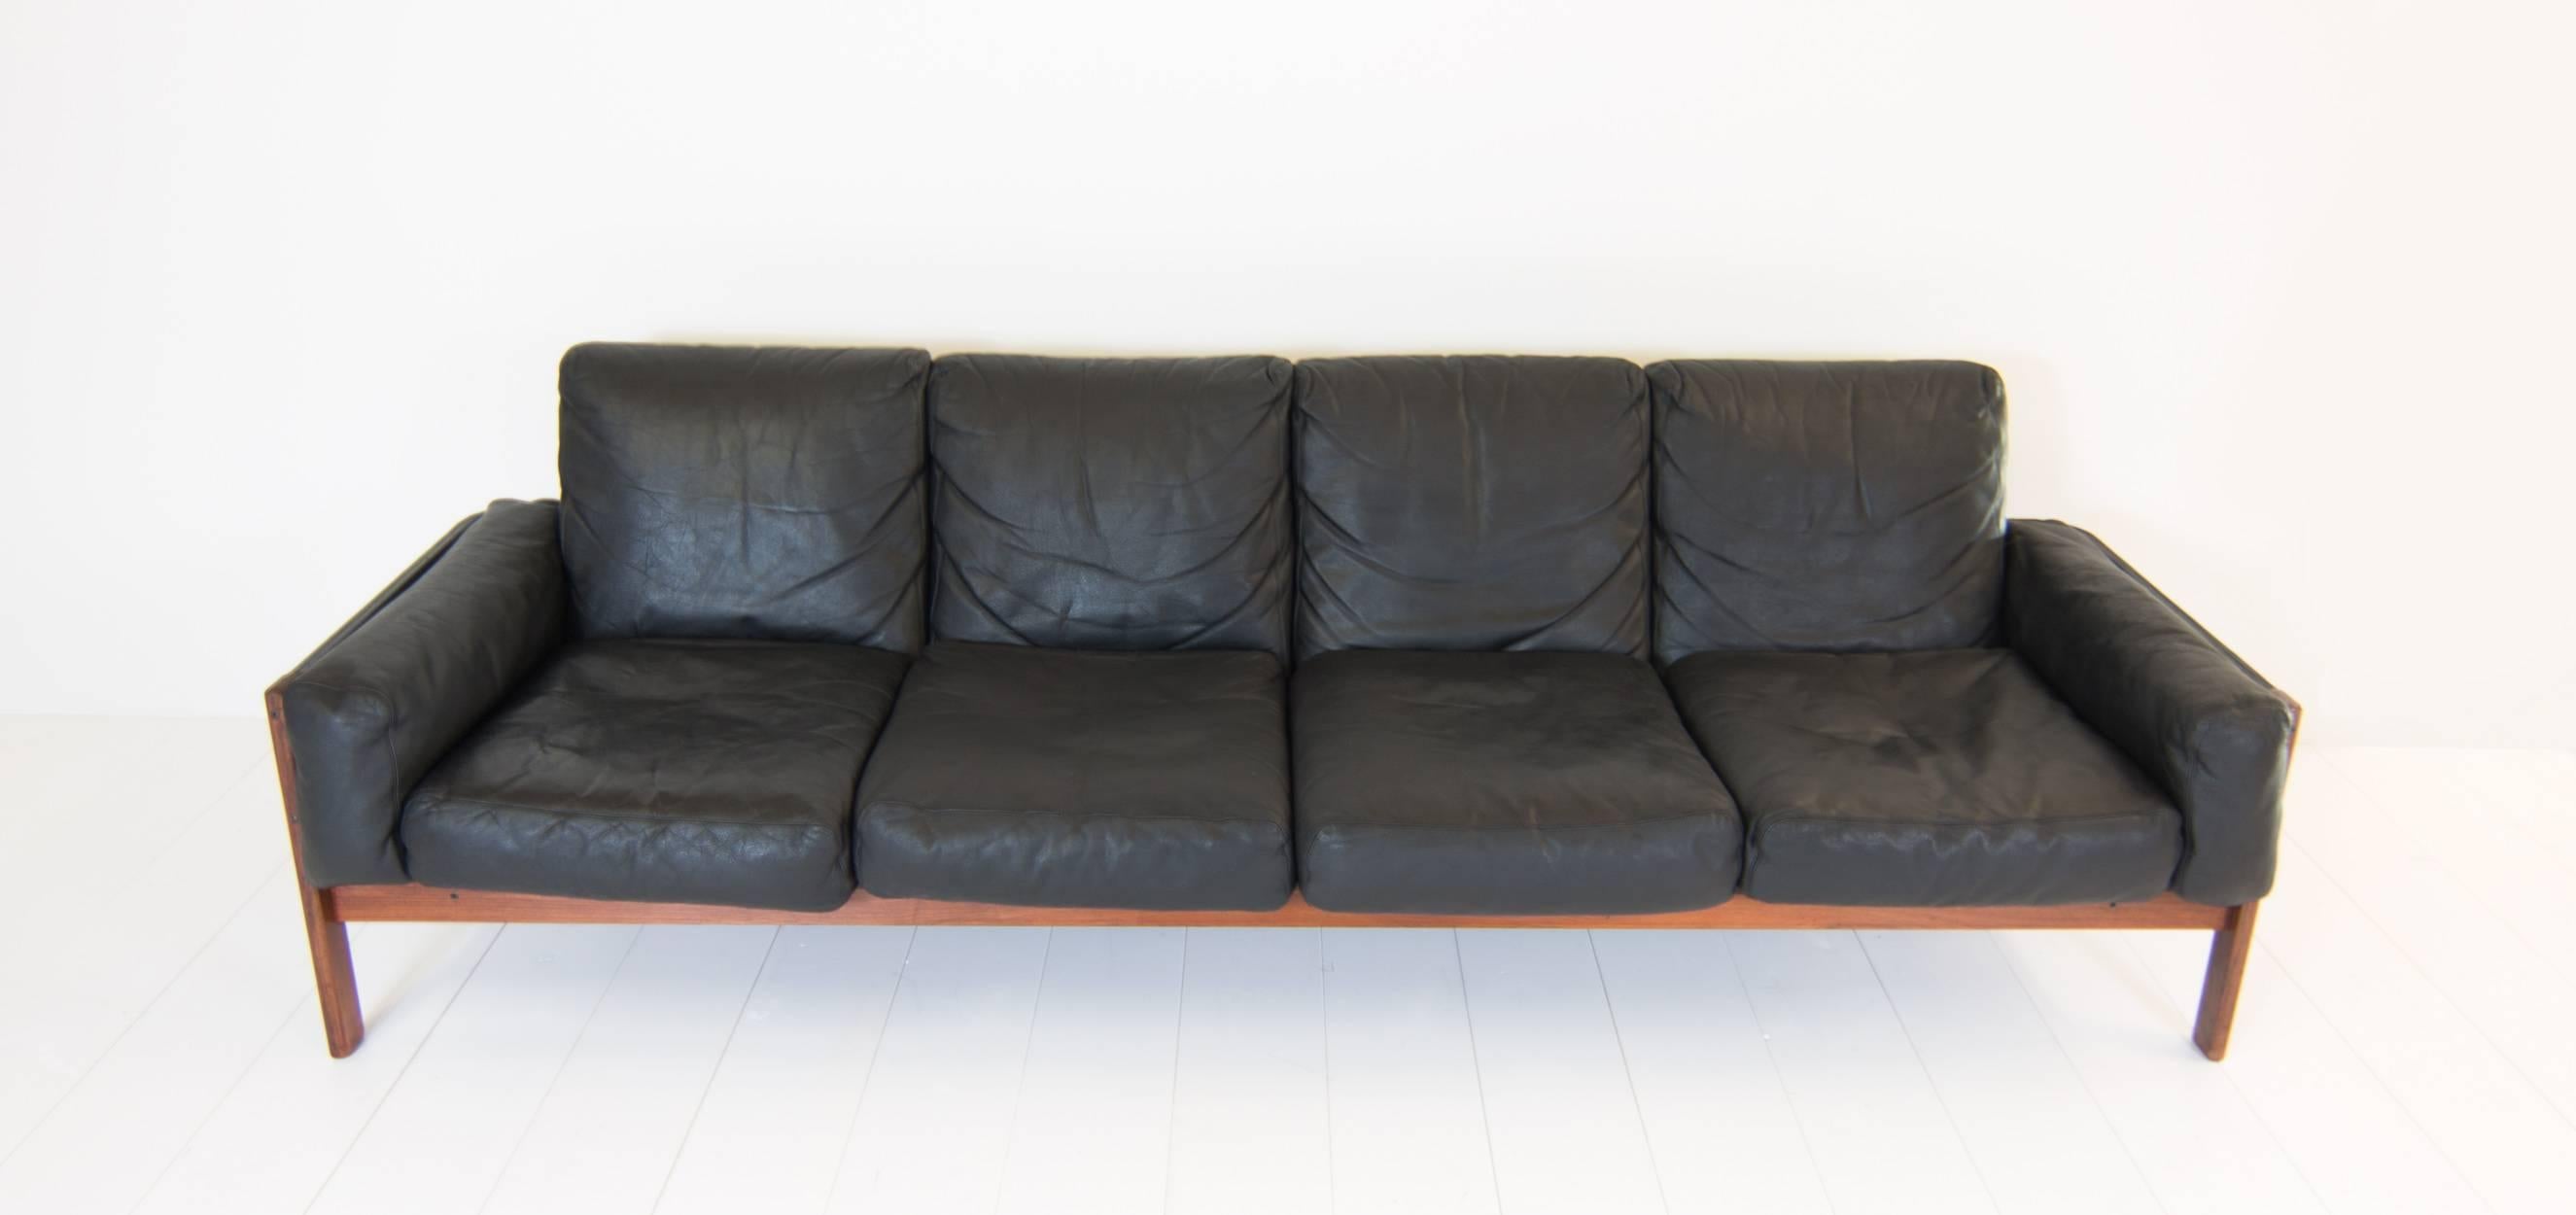 Norwegian Sven Ivar Dysthe Four-Seat Sofa with Original Black Leather Upholstery For Sale